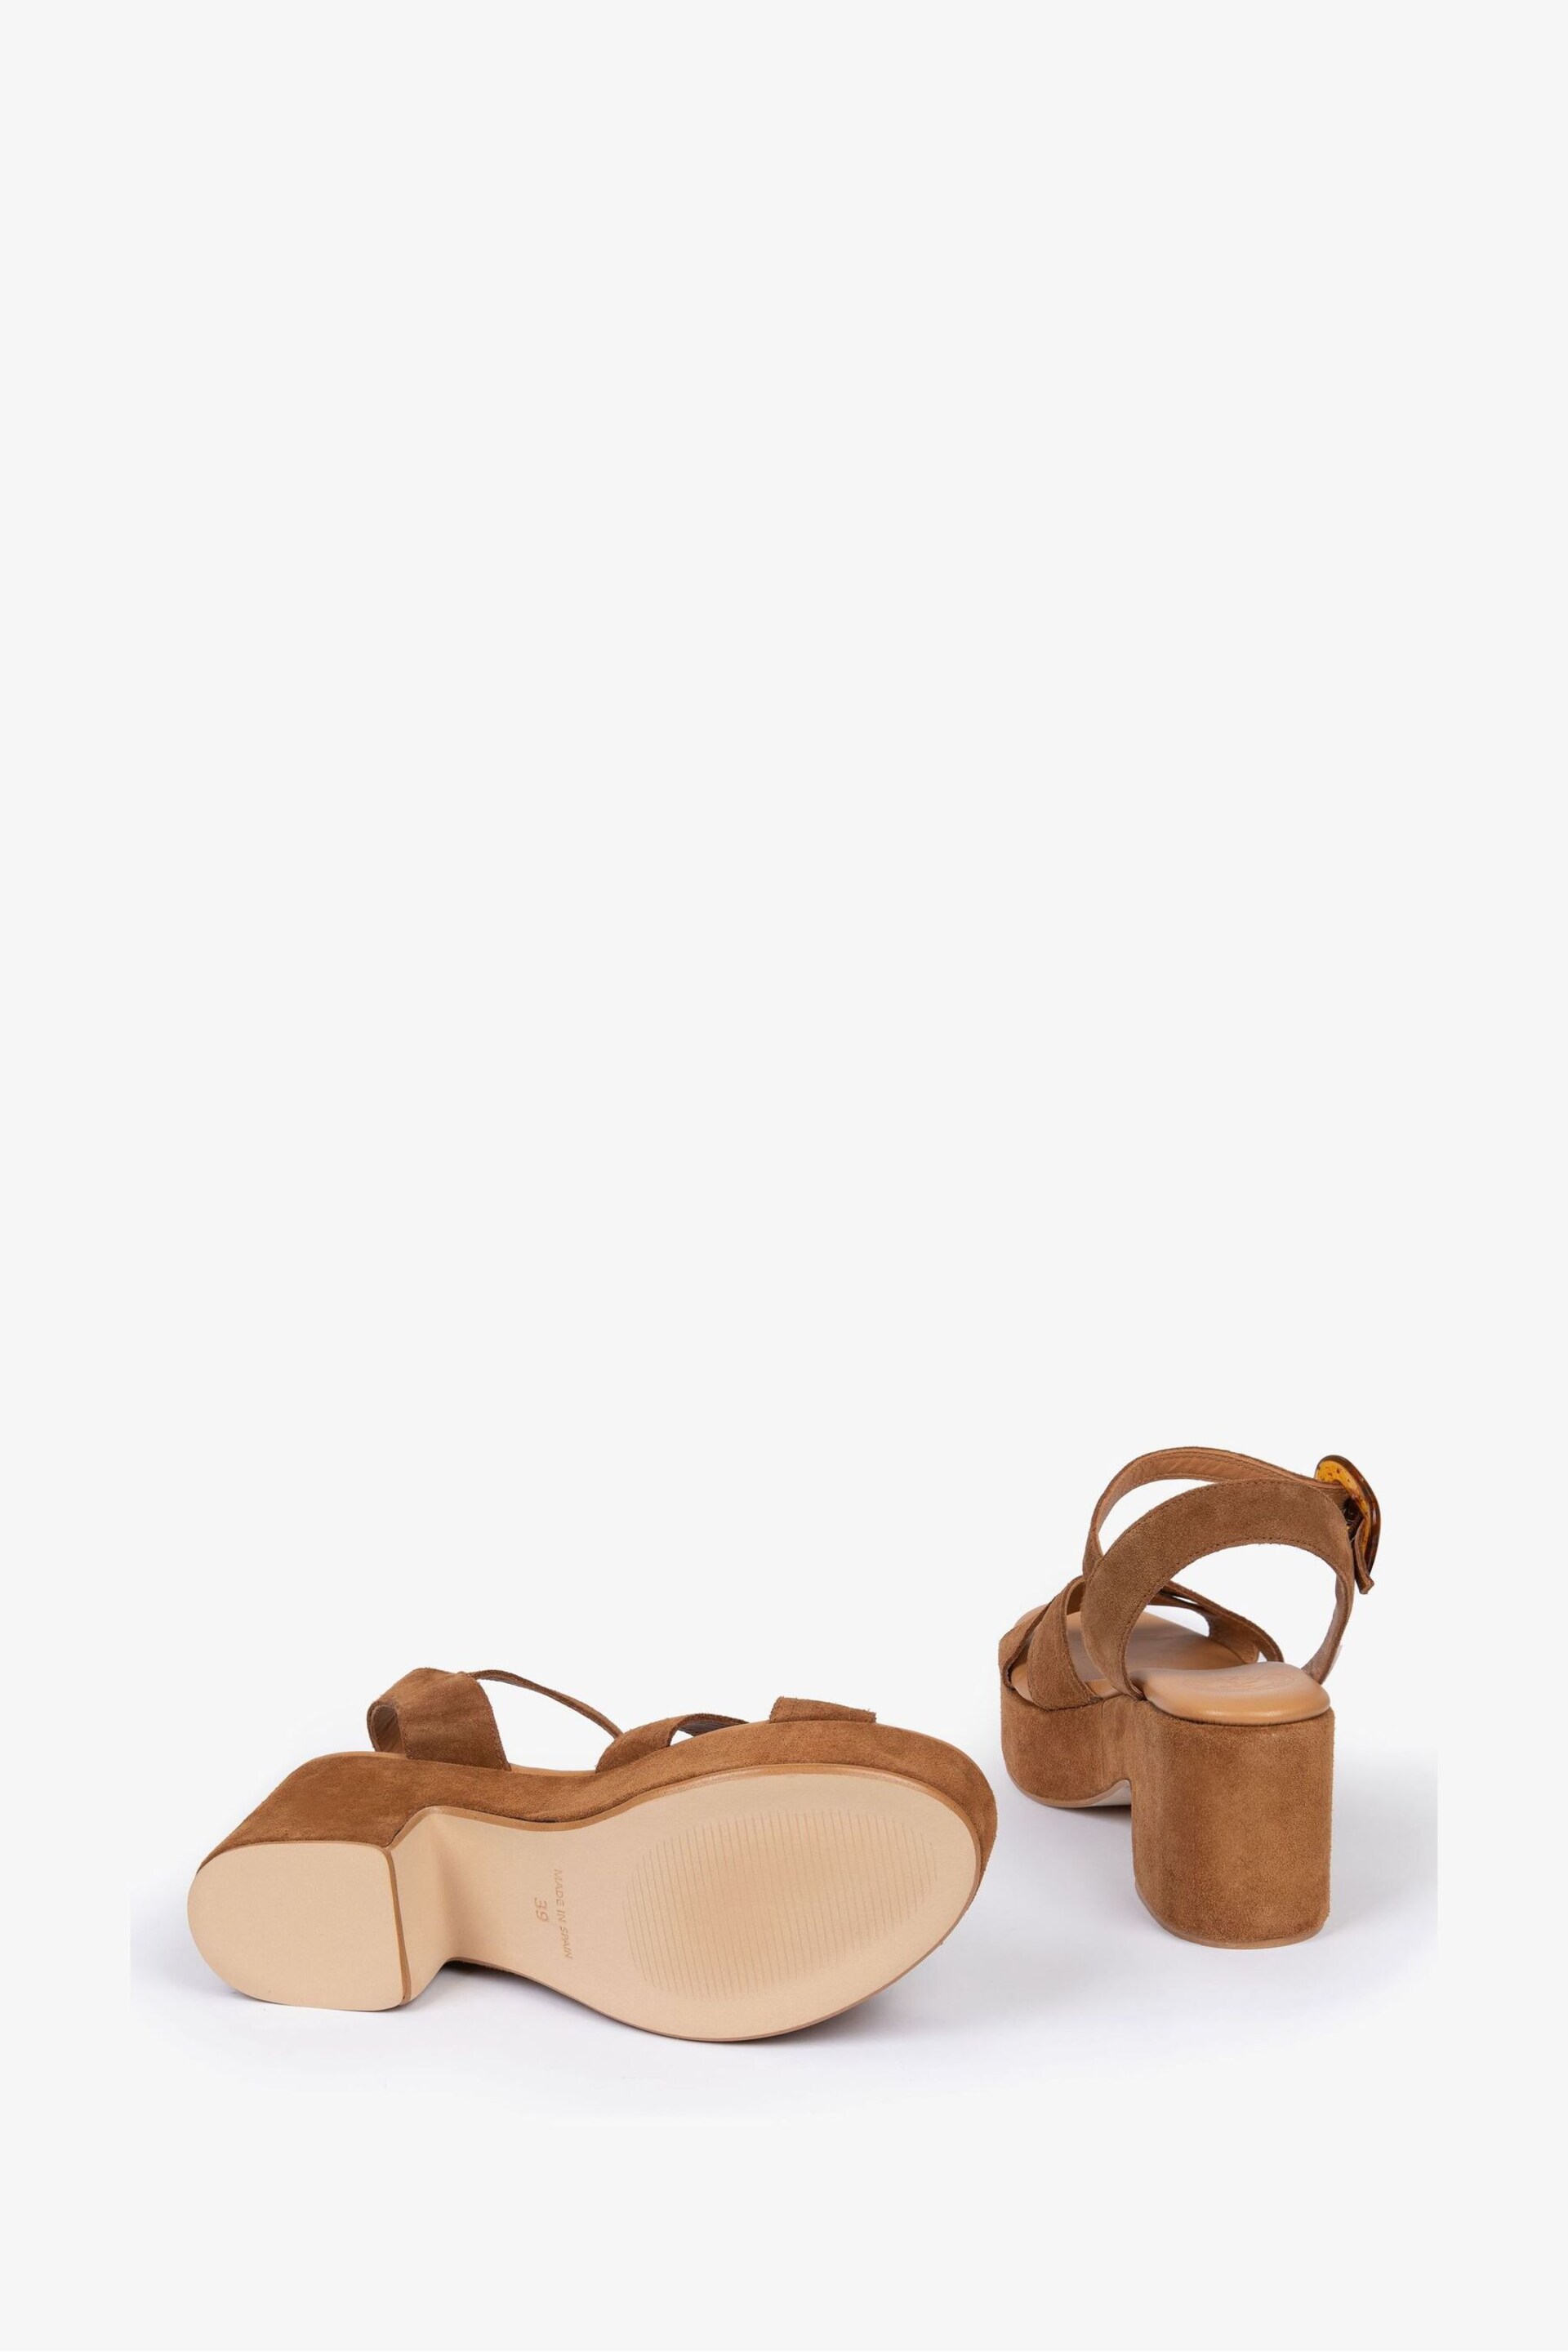 Penelope Chilvers Bella Suede Brown Sandals - Image 4 of 5